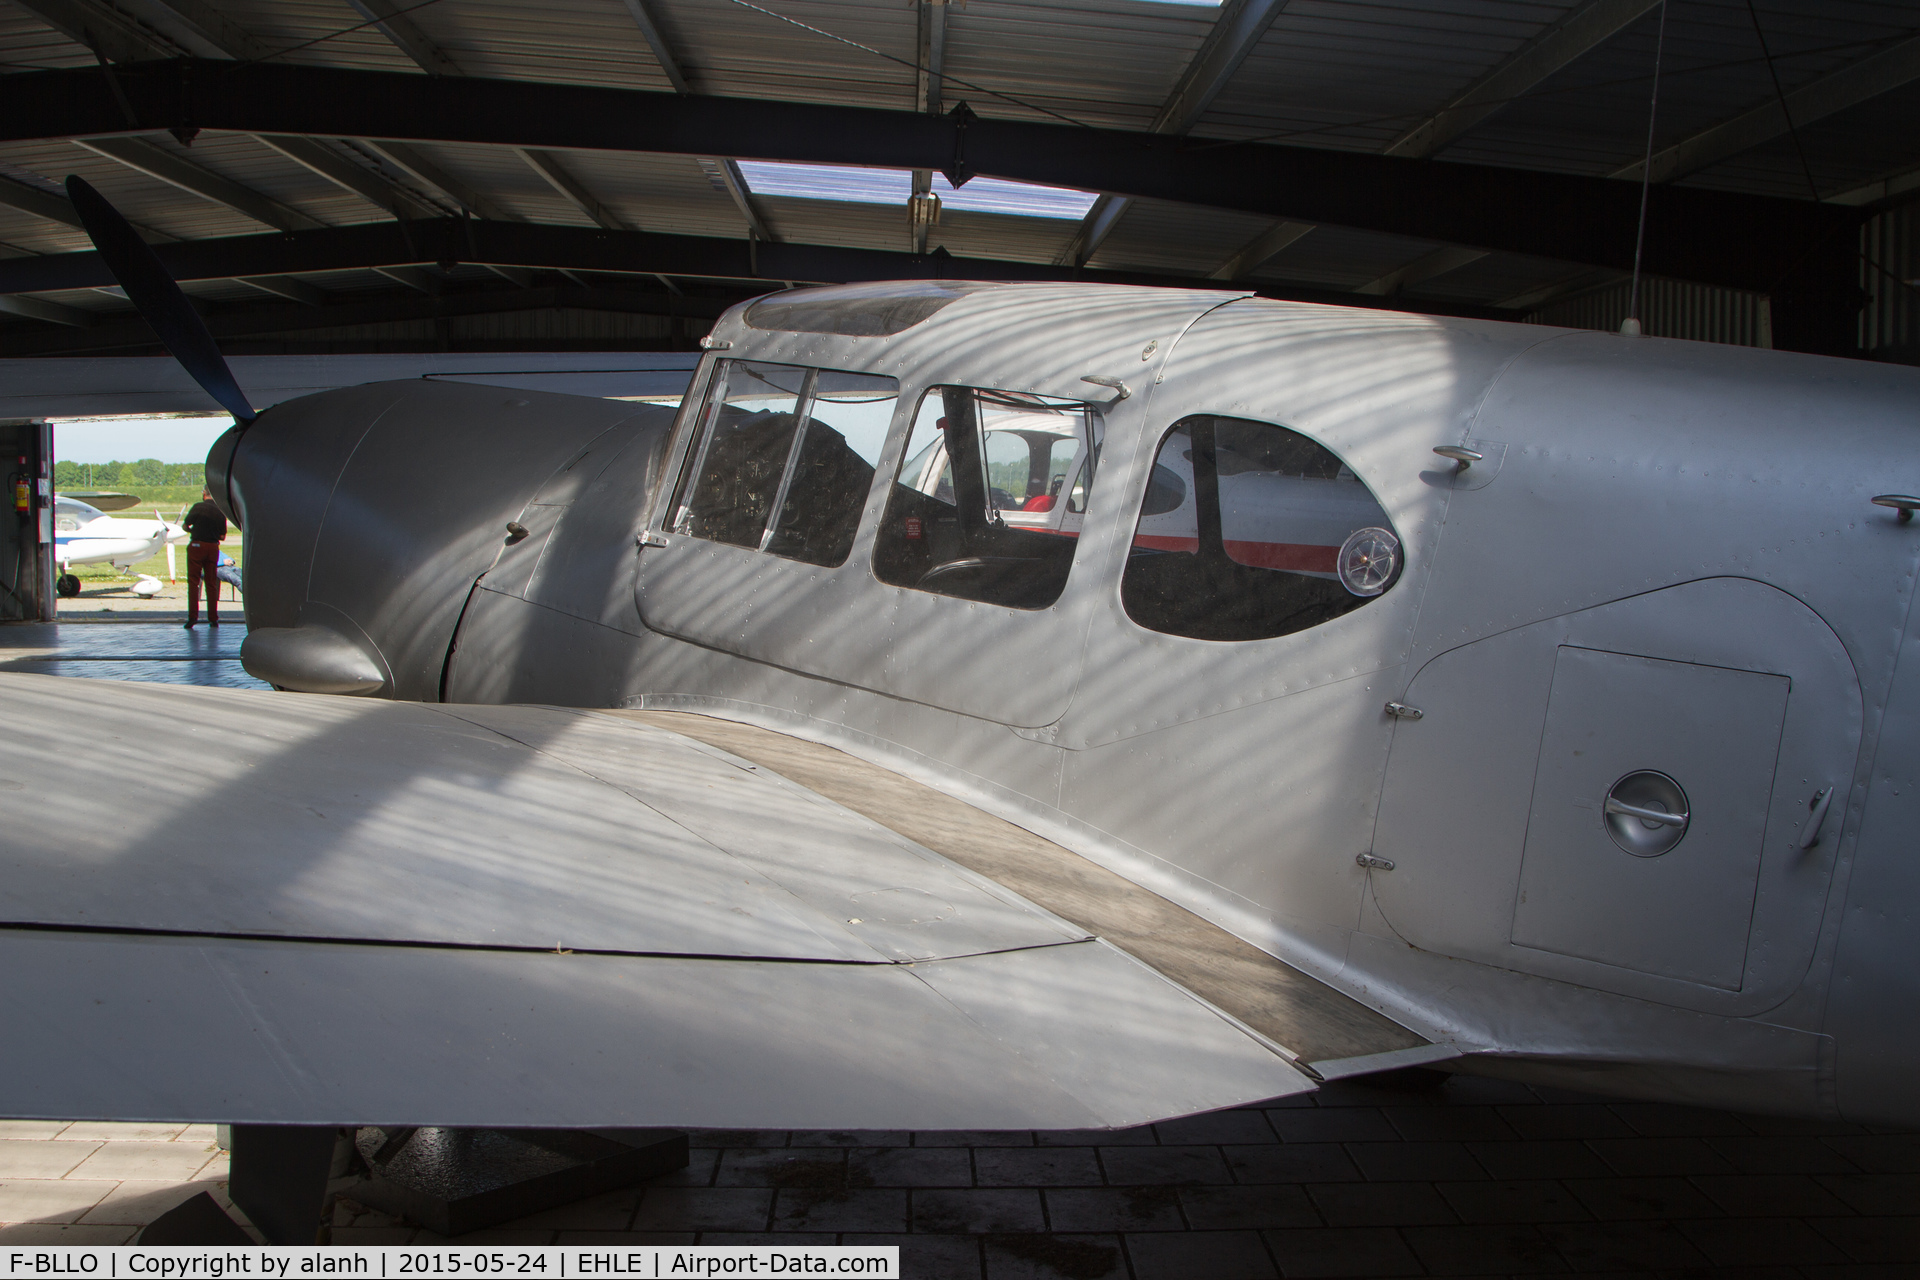 F-BLLO, Nord 1101 Noralpha C/N 179, In the back corner of an Early Birds Foundation hangar at Lelystad